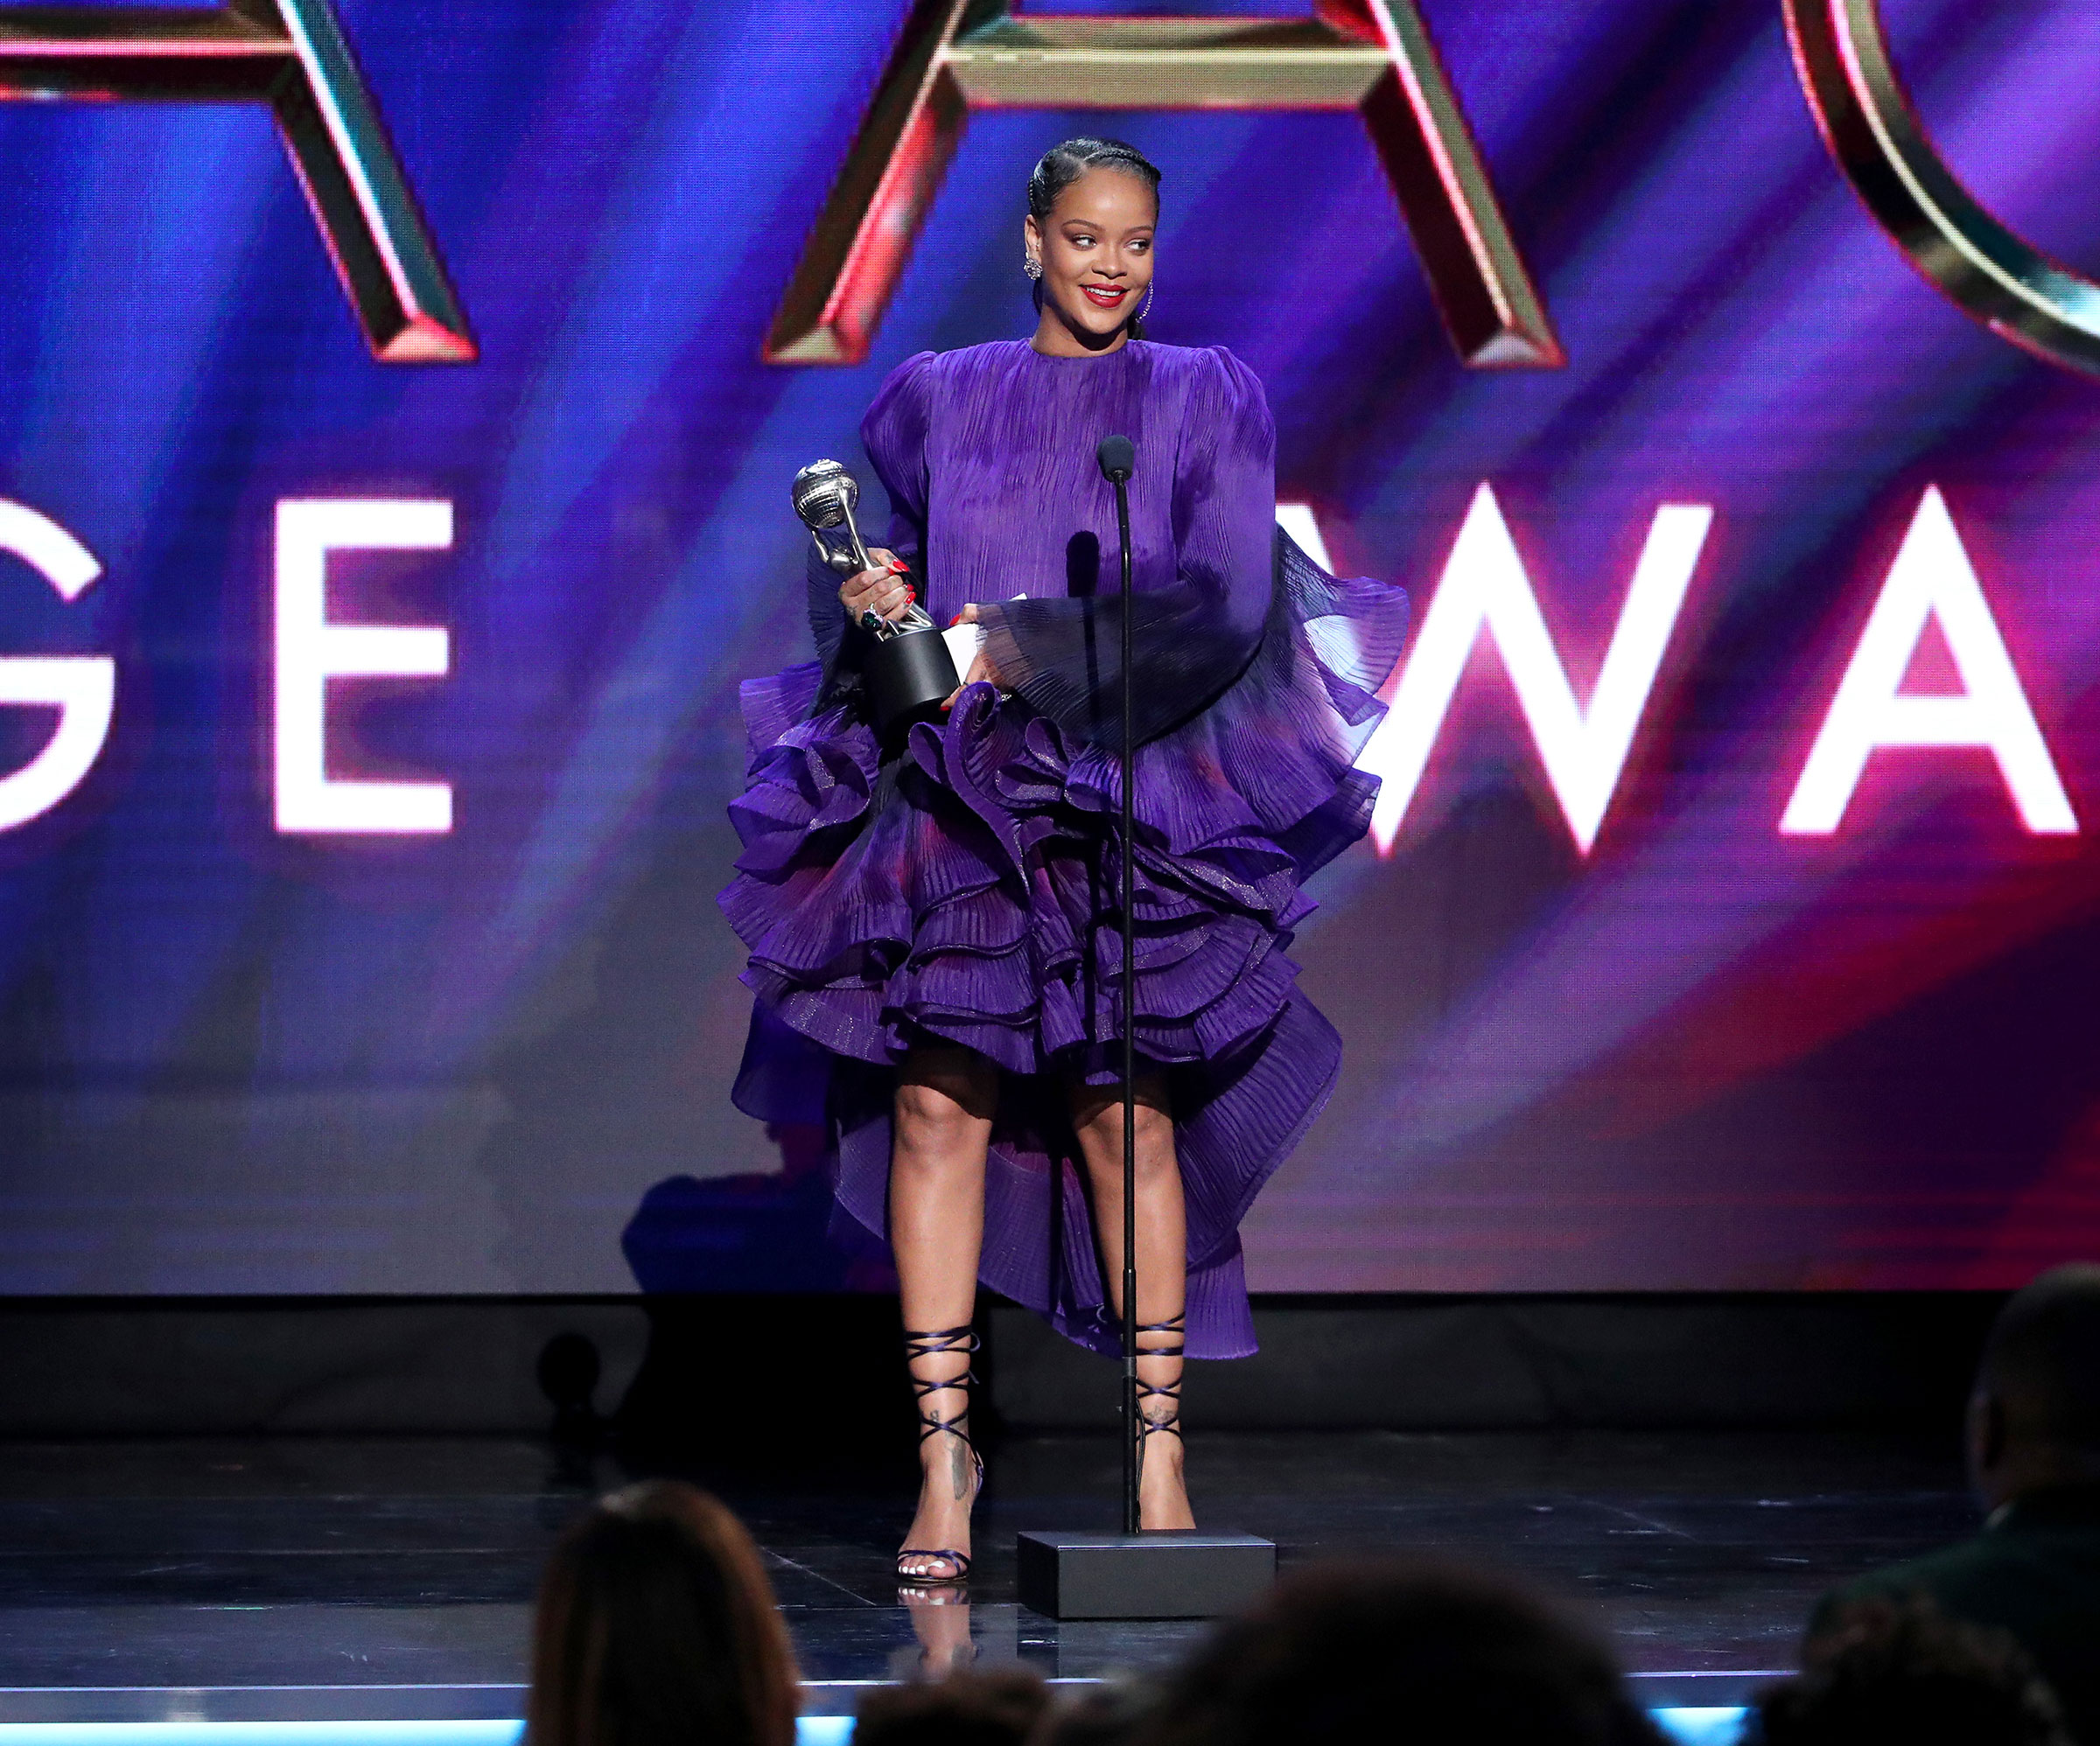 Rihanna accepts the President's Award onstage during the 51st NAACP Image Awards in Pasadena, Calif. on Feb. 22, 2020. (Rich Fury—Getty Images)